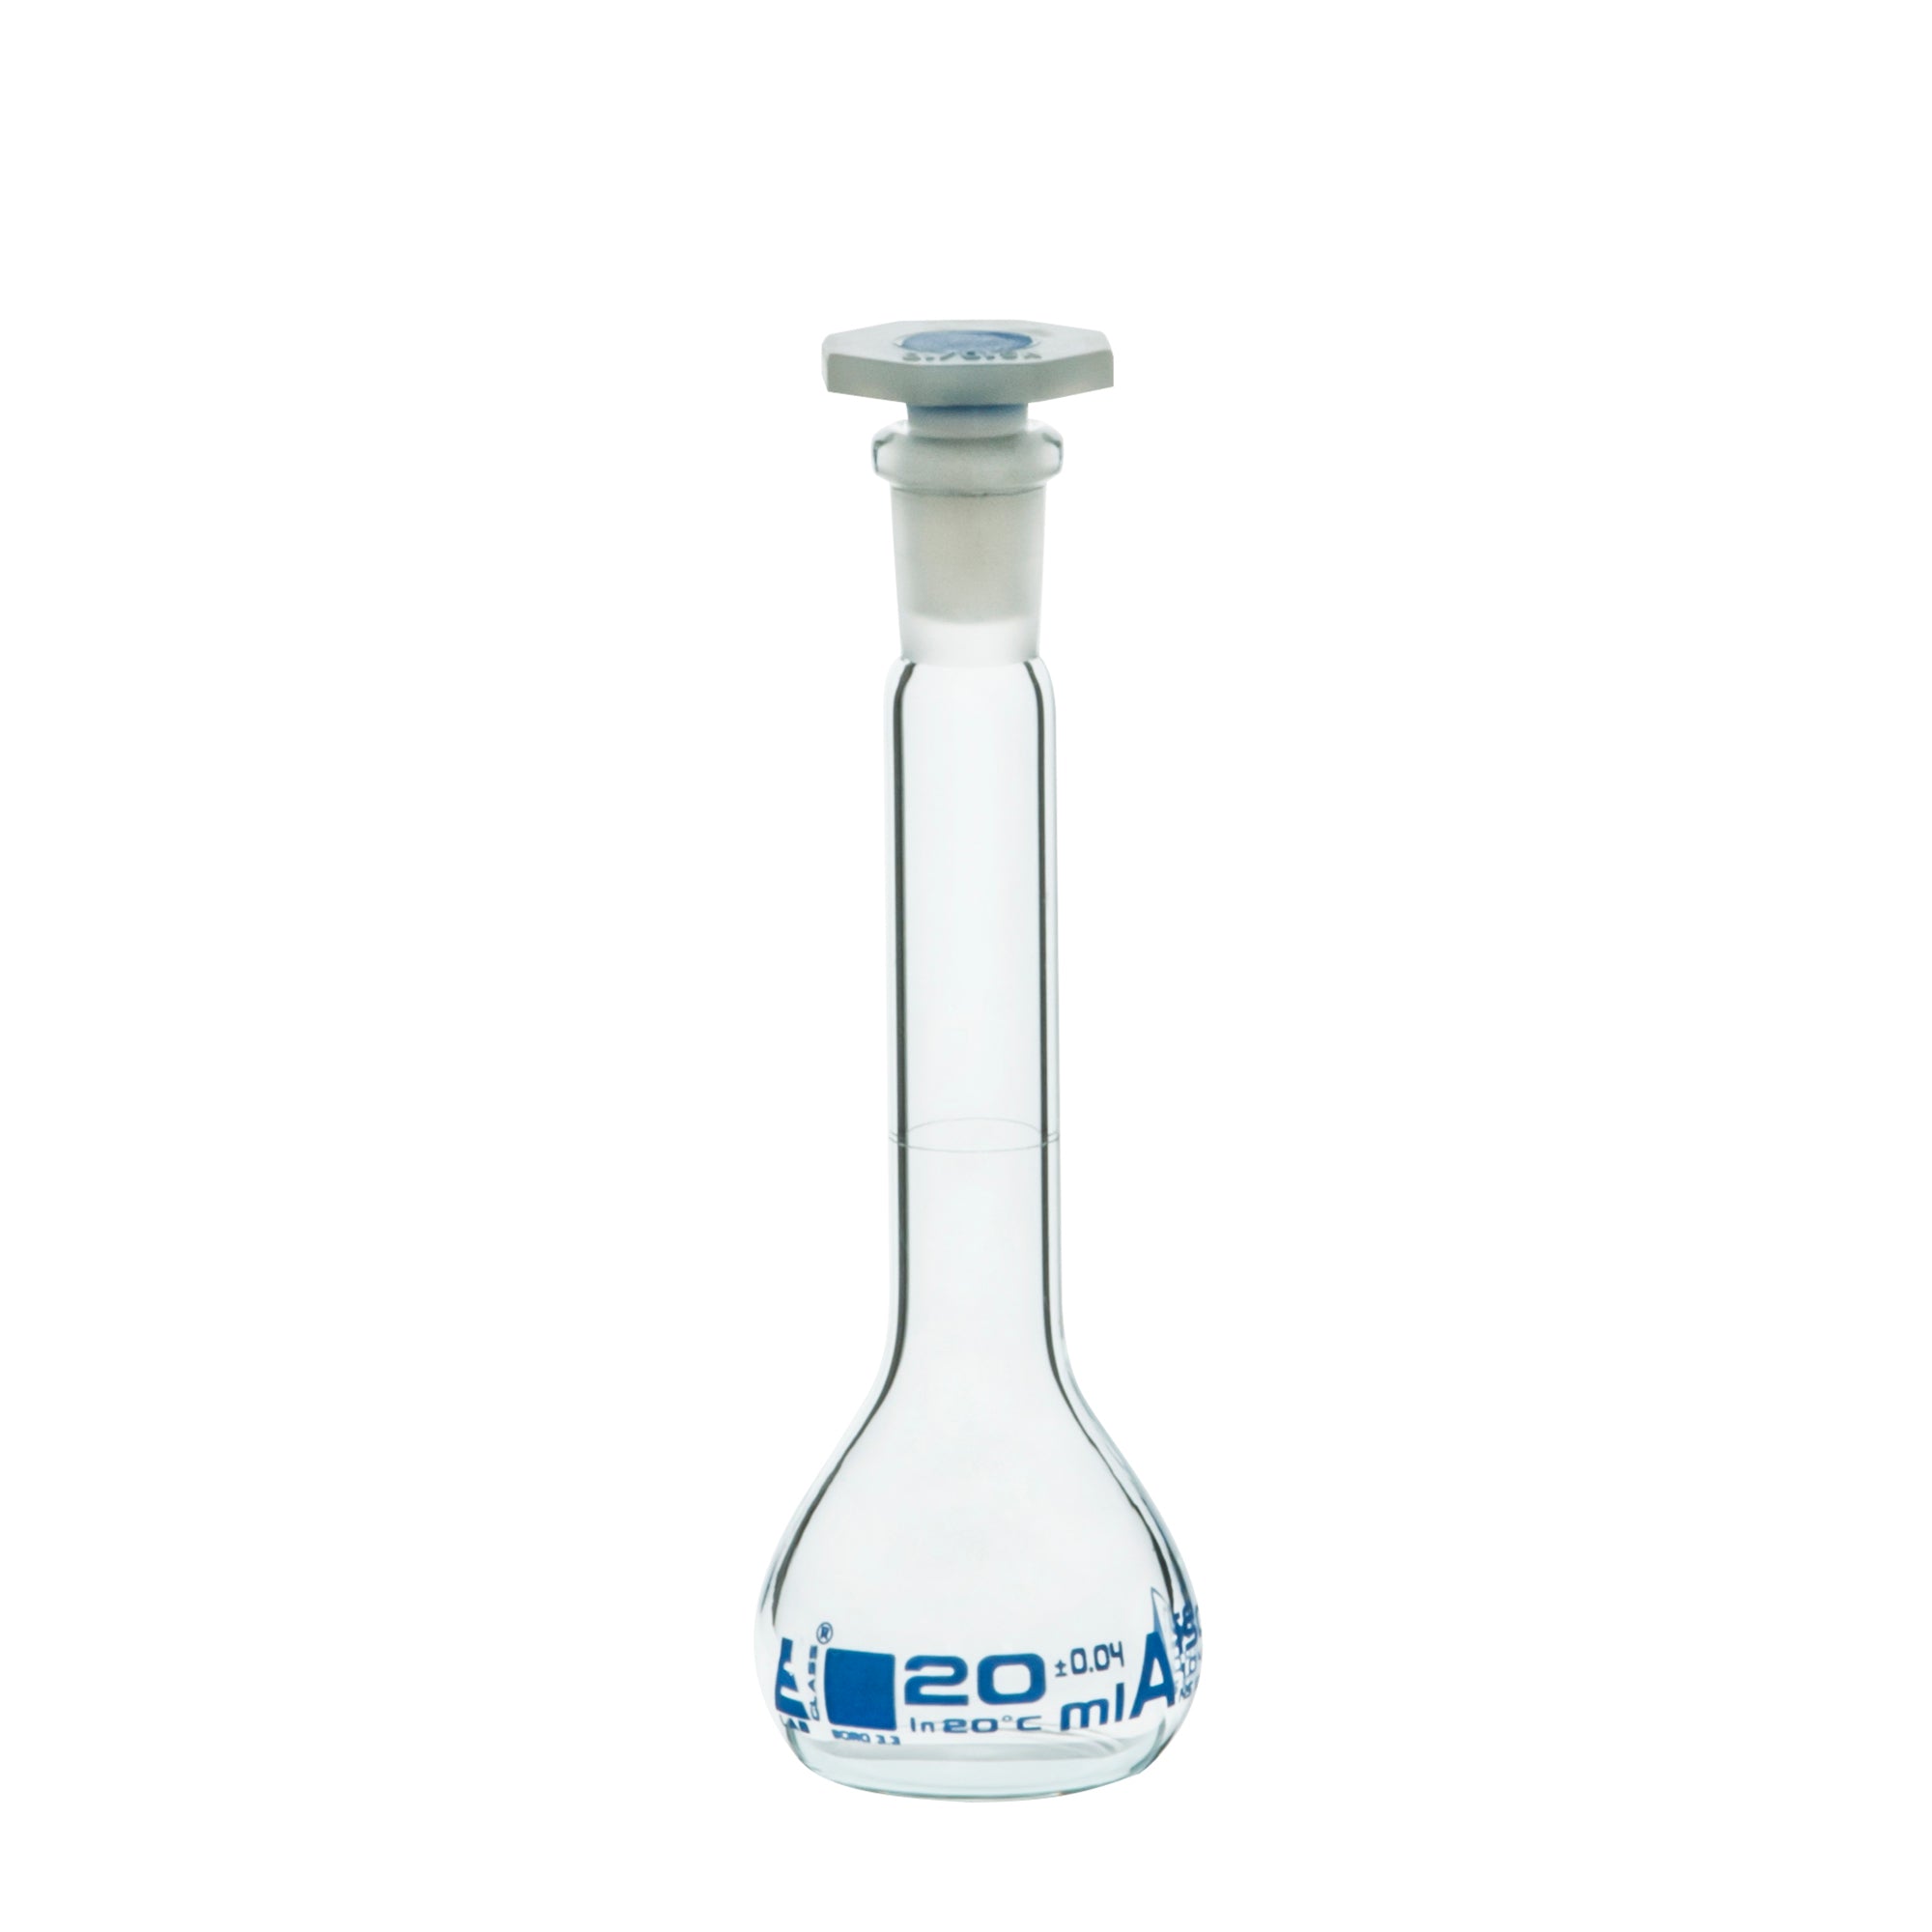 Borosilicate Glass Volumetric Flask with Polypropylene Stopper, 20 ml, Class A with Individual Work Certificate, Pack of 2,  Autoclavable